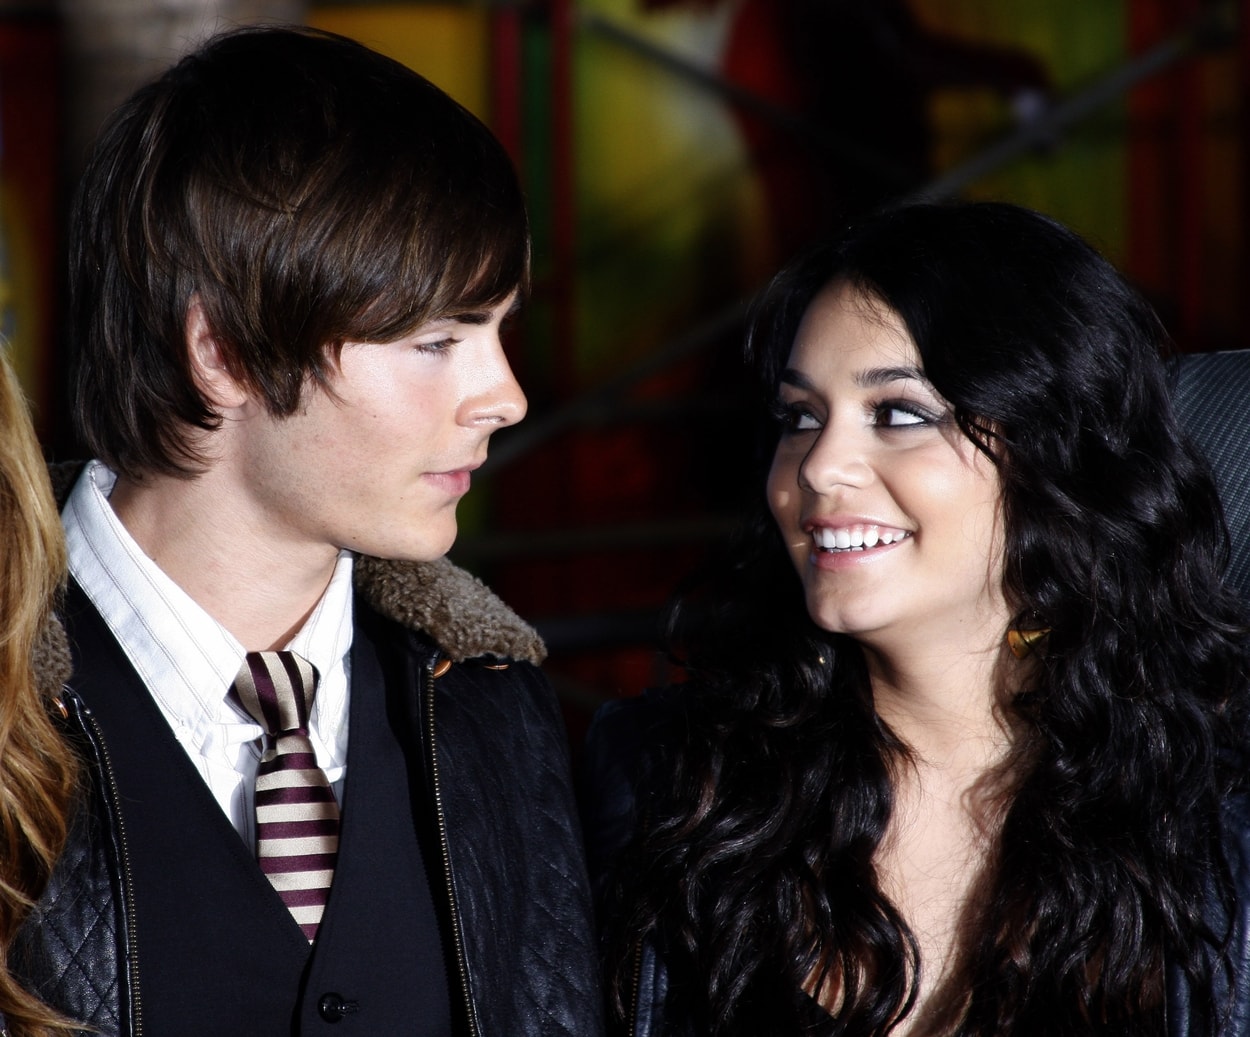 Zac Efron and Vanessa Hudgens met in 2005 during their audition for High School Musical and dated until 2010